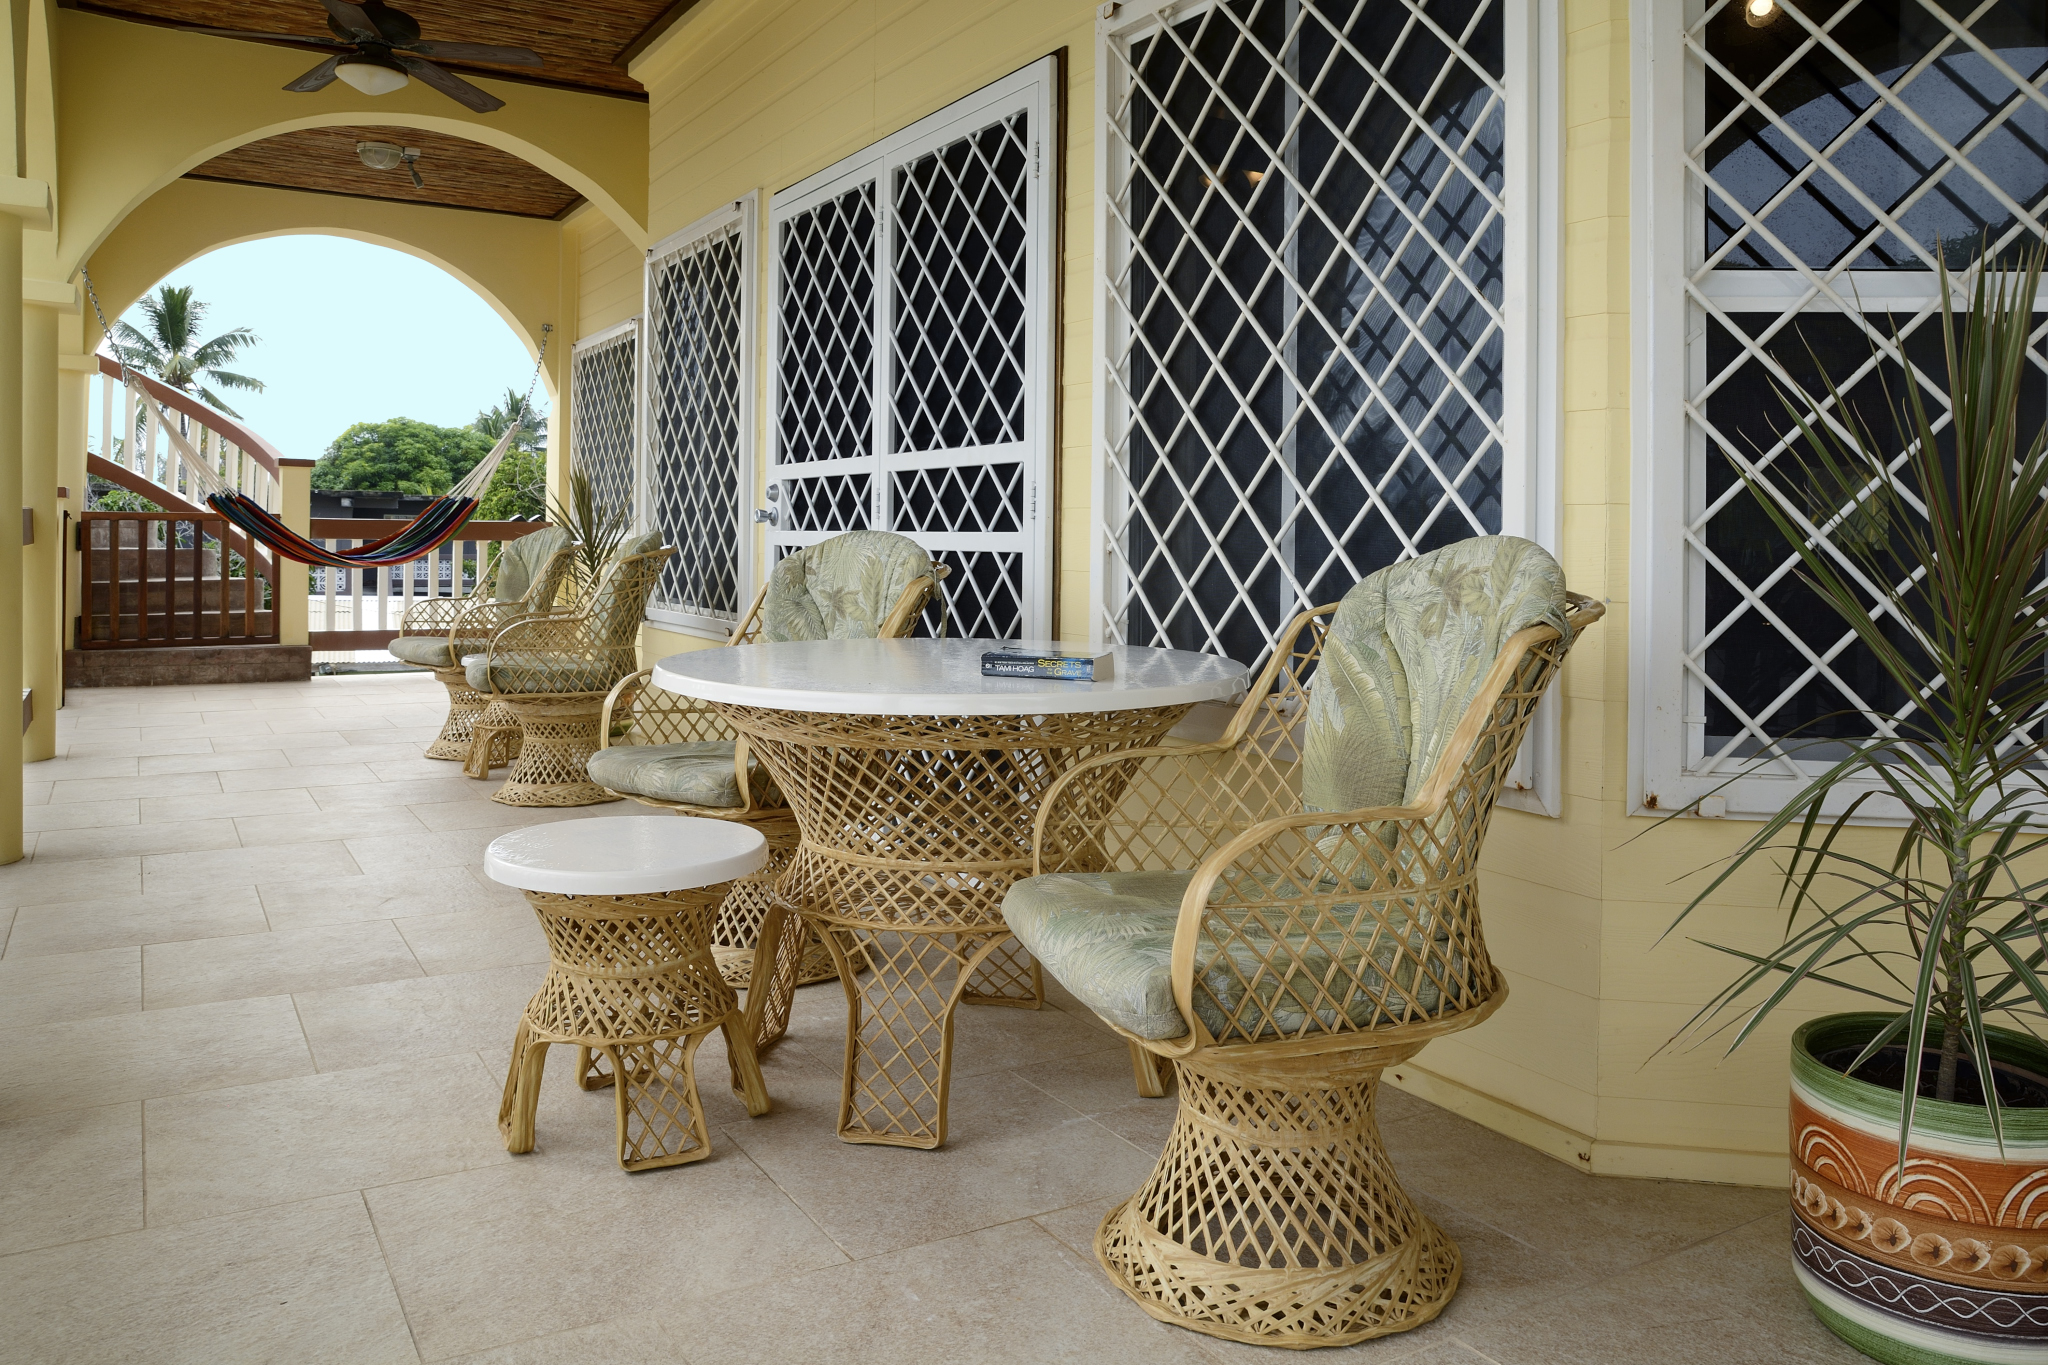 Rattan Table & Chairs on Main Deck.